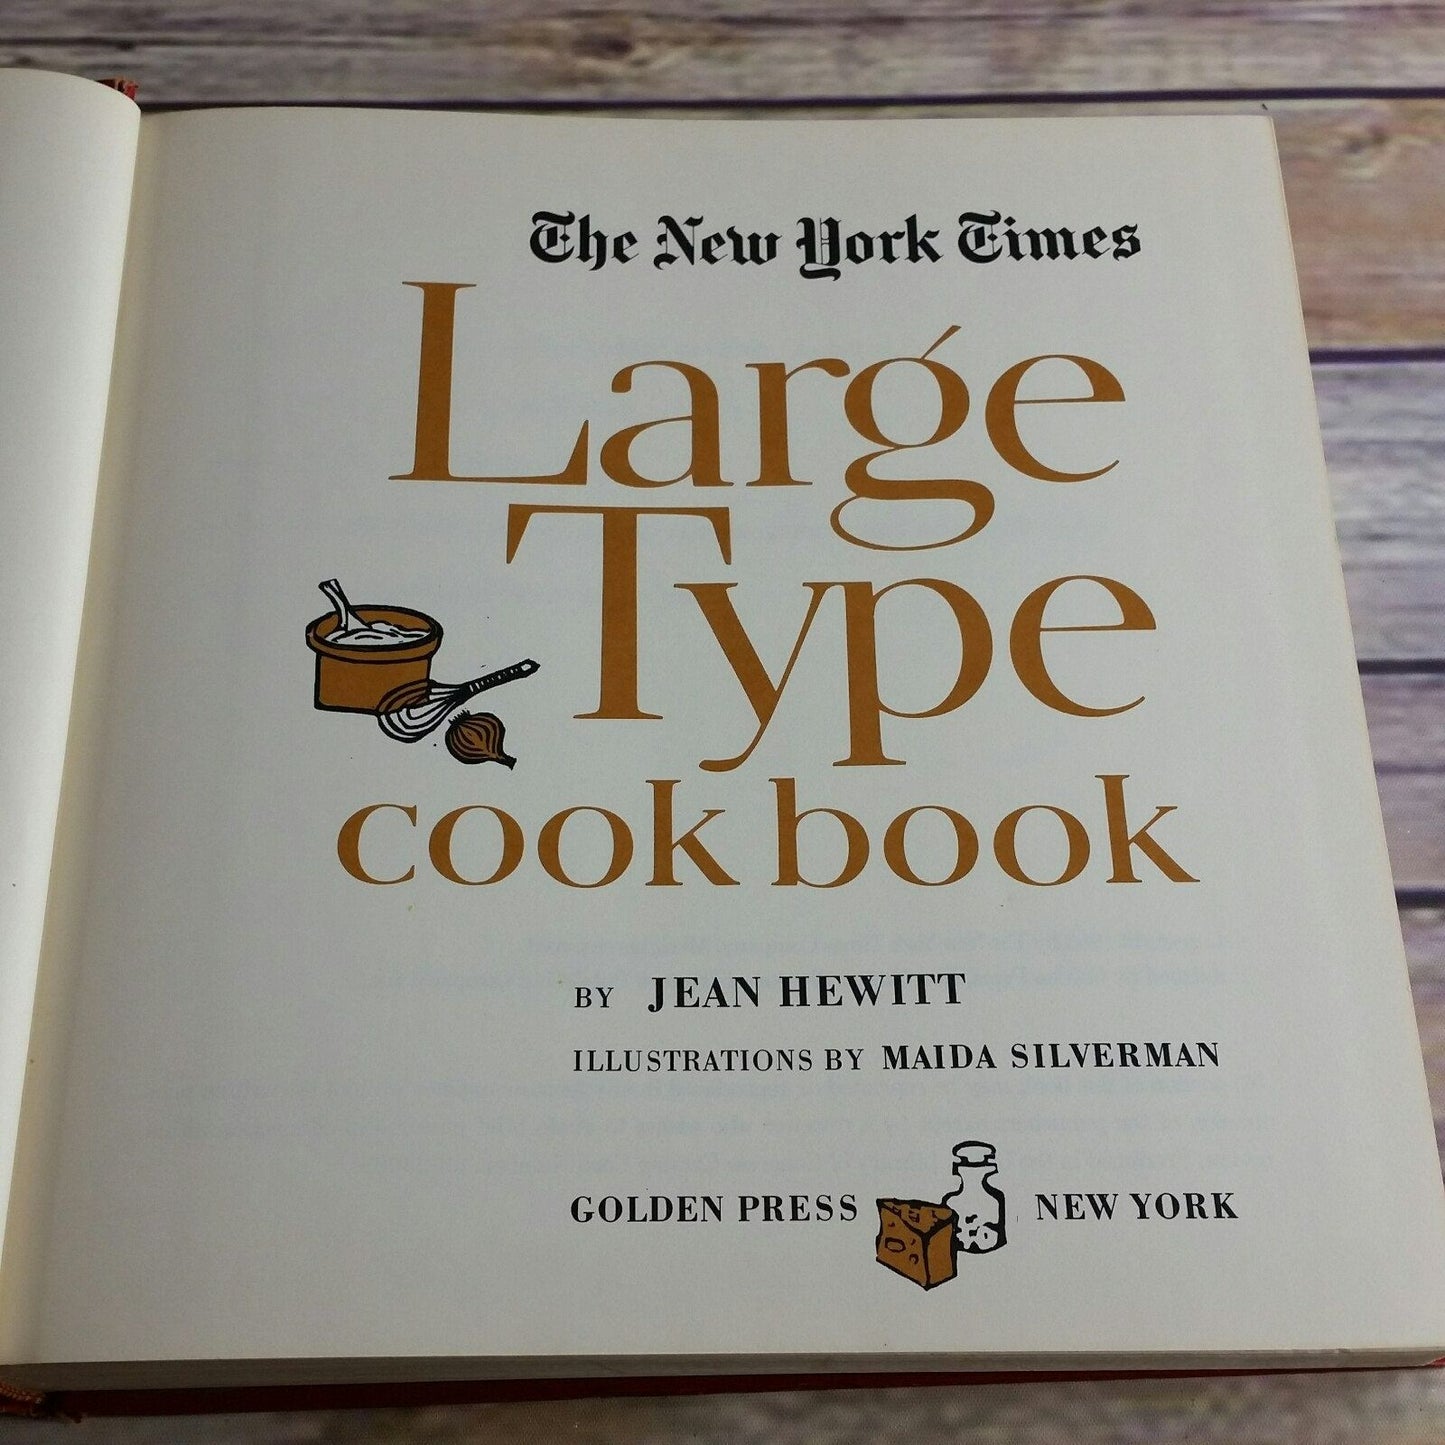 Vintage Cookbook New York Times Large Type Edition 1968 Hardcover NO Dust Jacket Large Print Easy to Read Food Editor Recipes